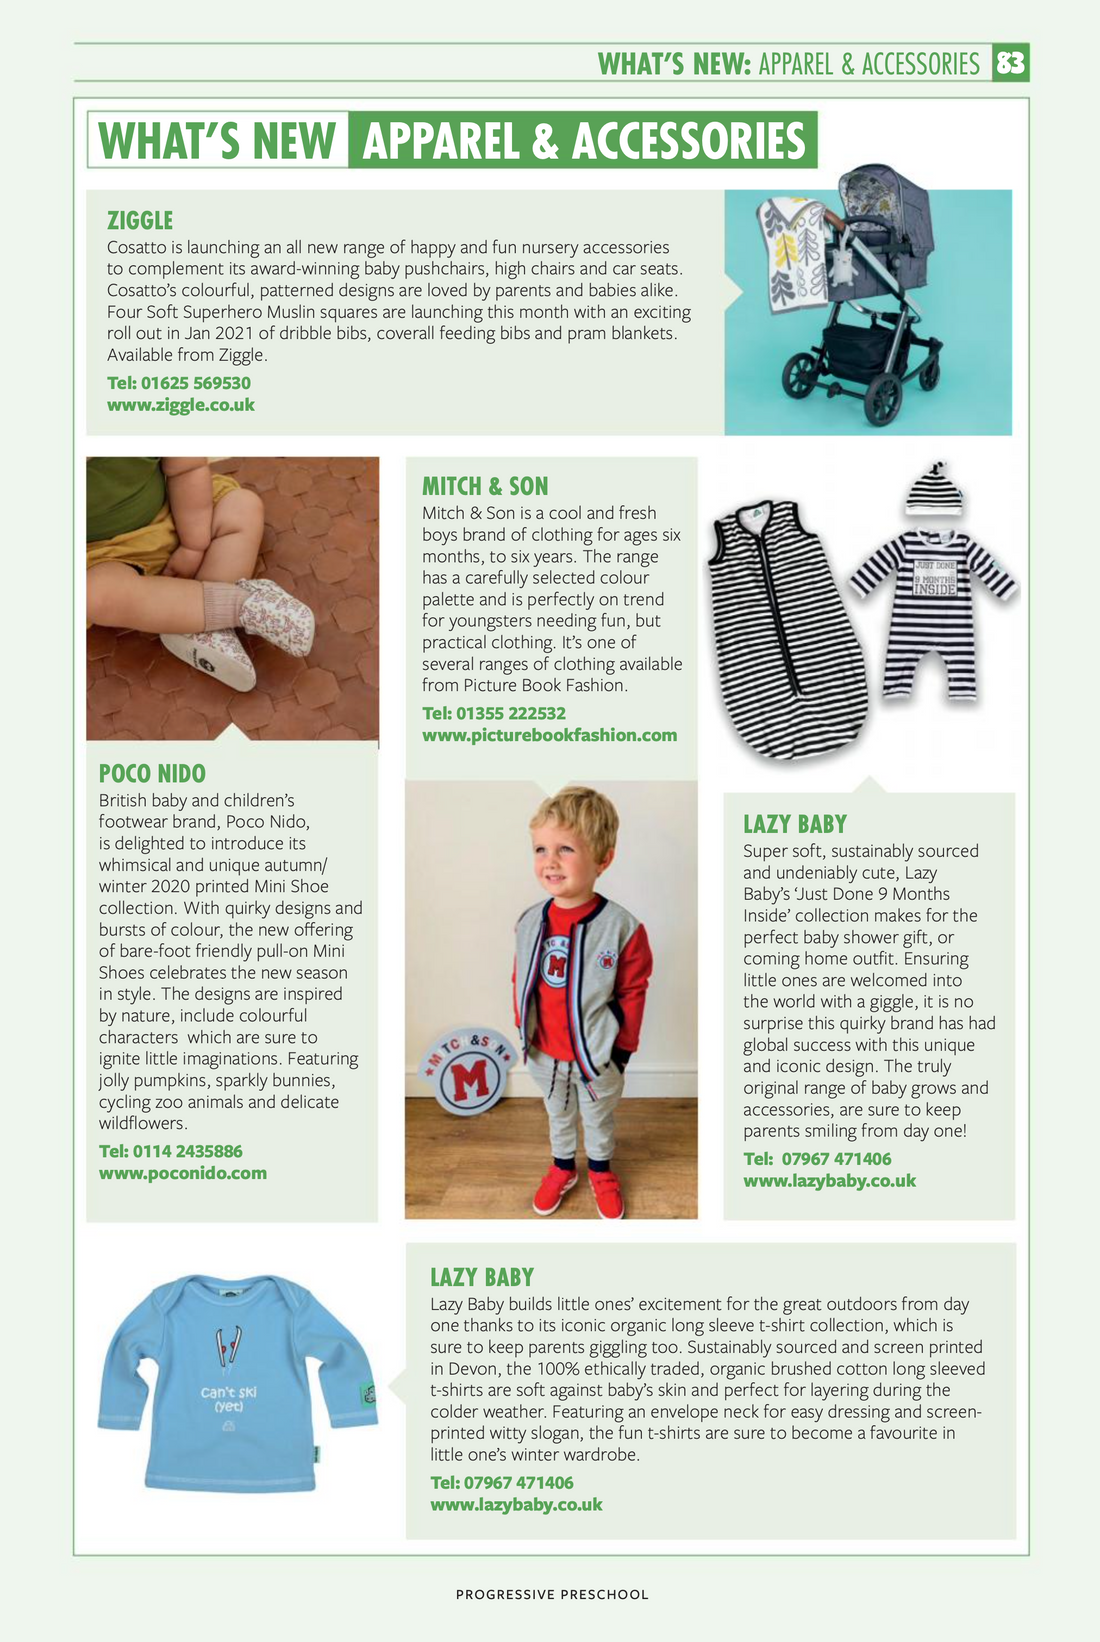 Great to be featured in Progressive Pre School this Month